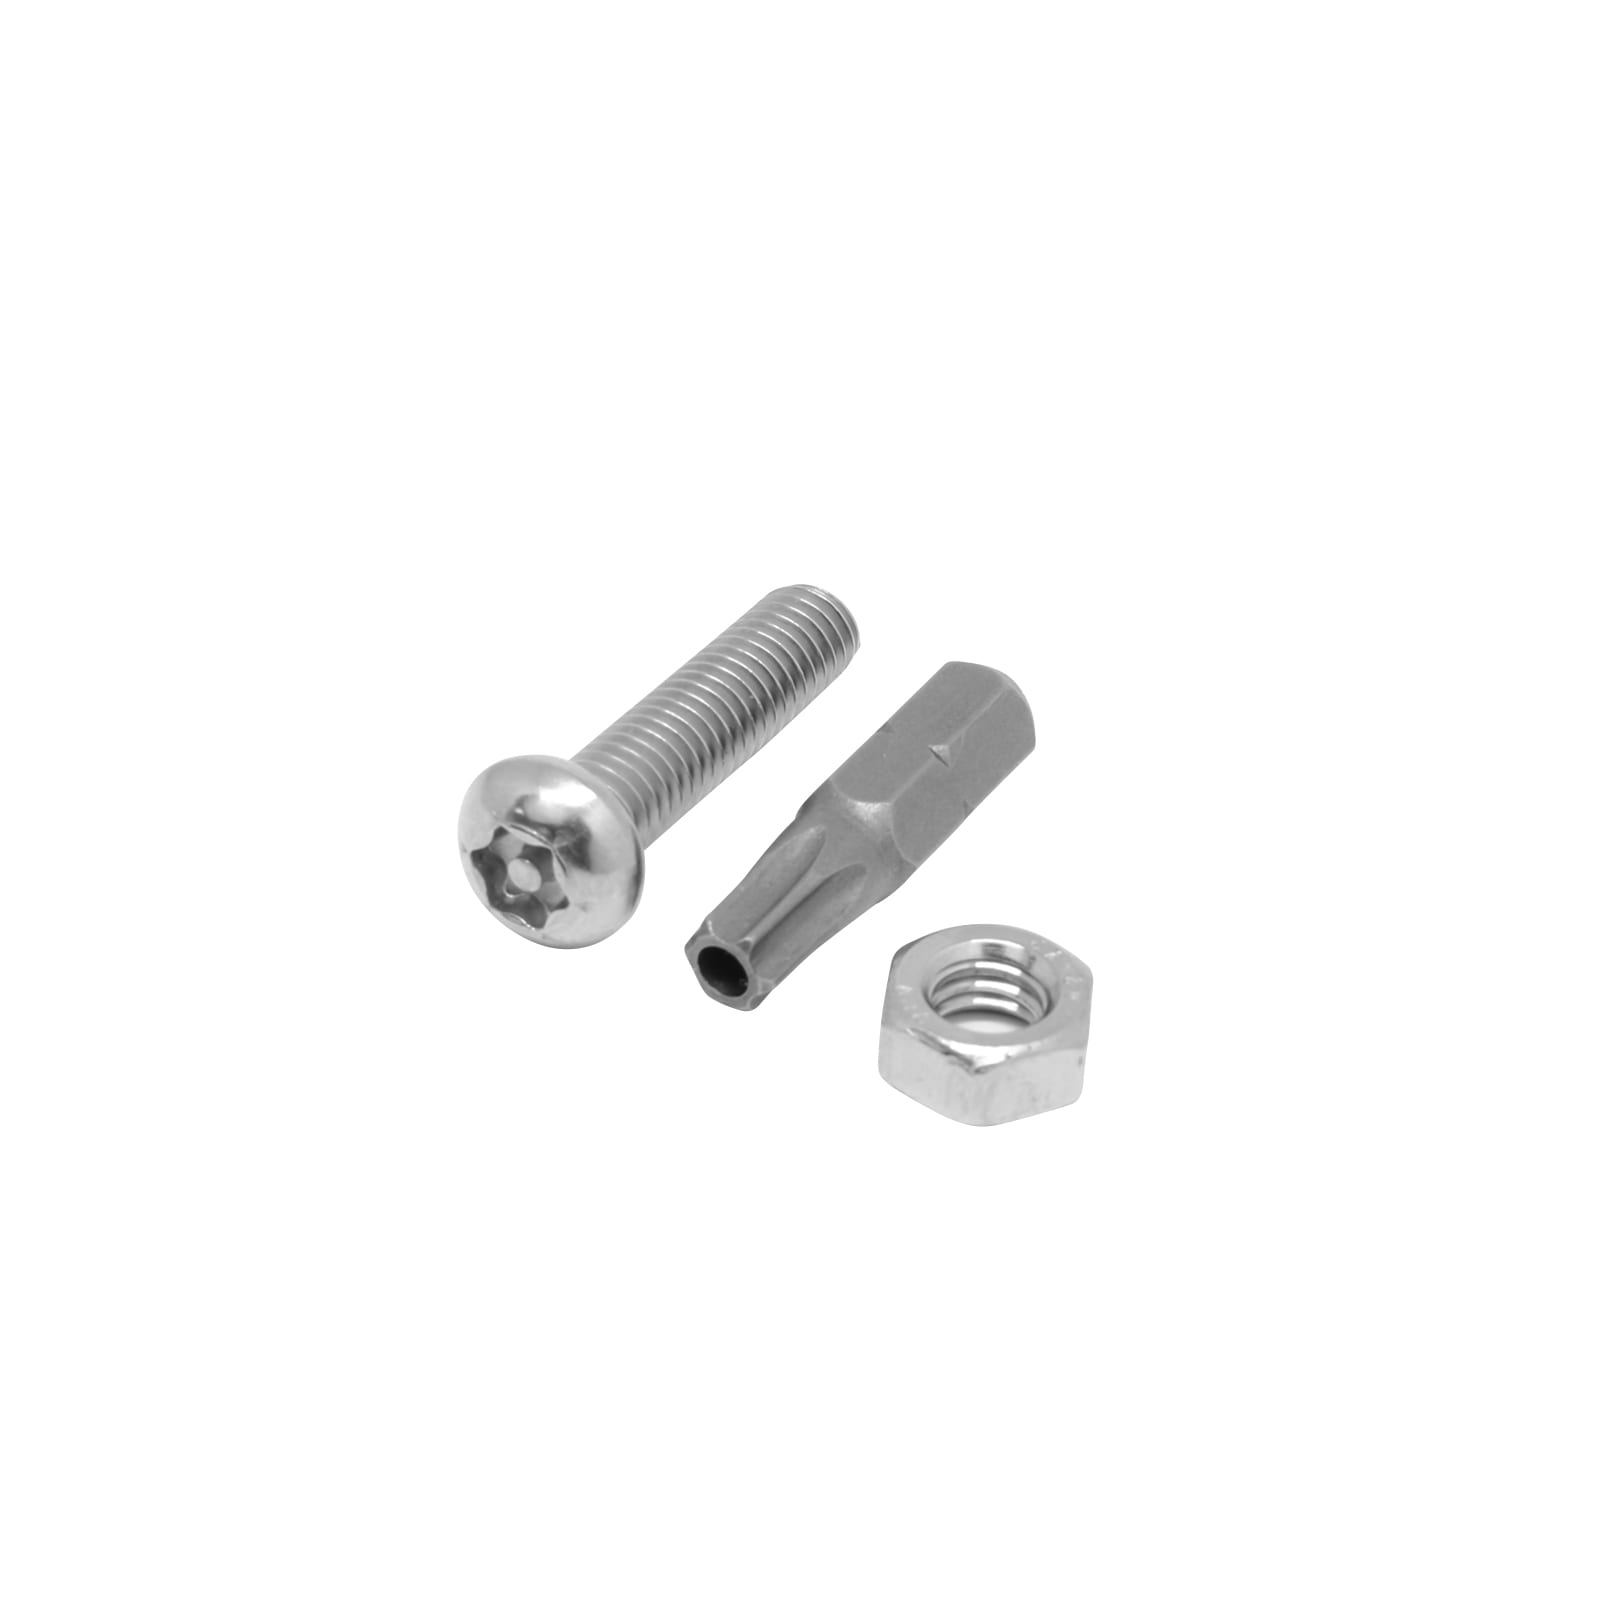 SECURITY BOLT M8 - 1.25 x 25 STAINLESS STEEL ROUND HEAD